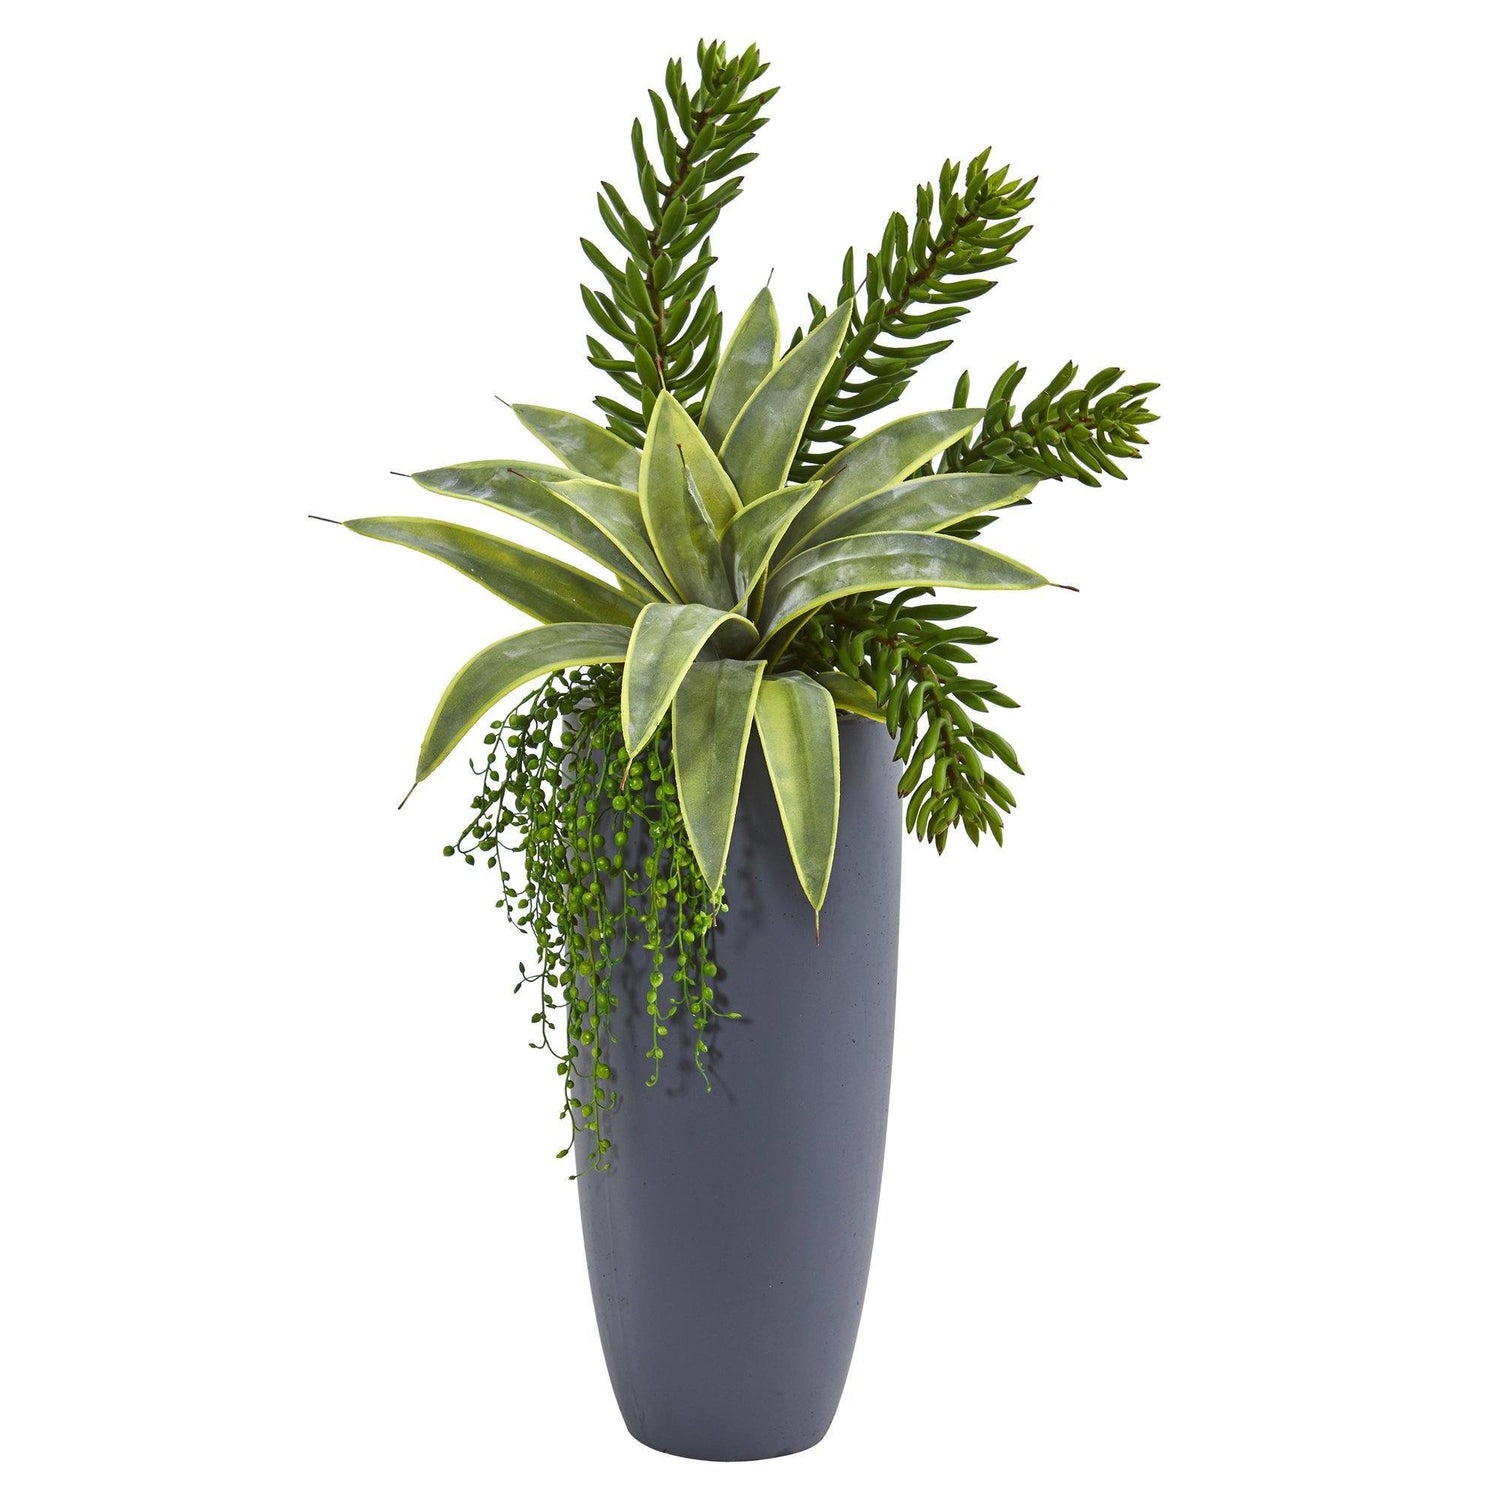 33” Sansevieria and Succulent Artificial Plant in Gray Planter